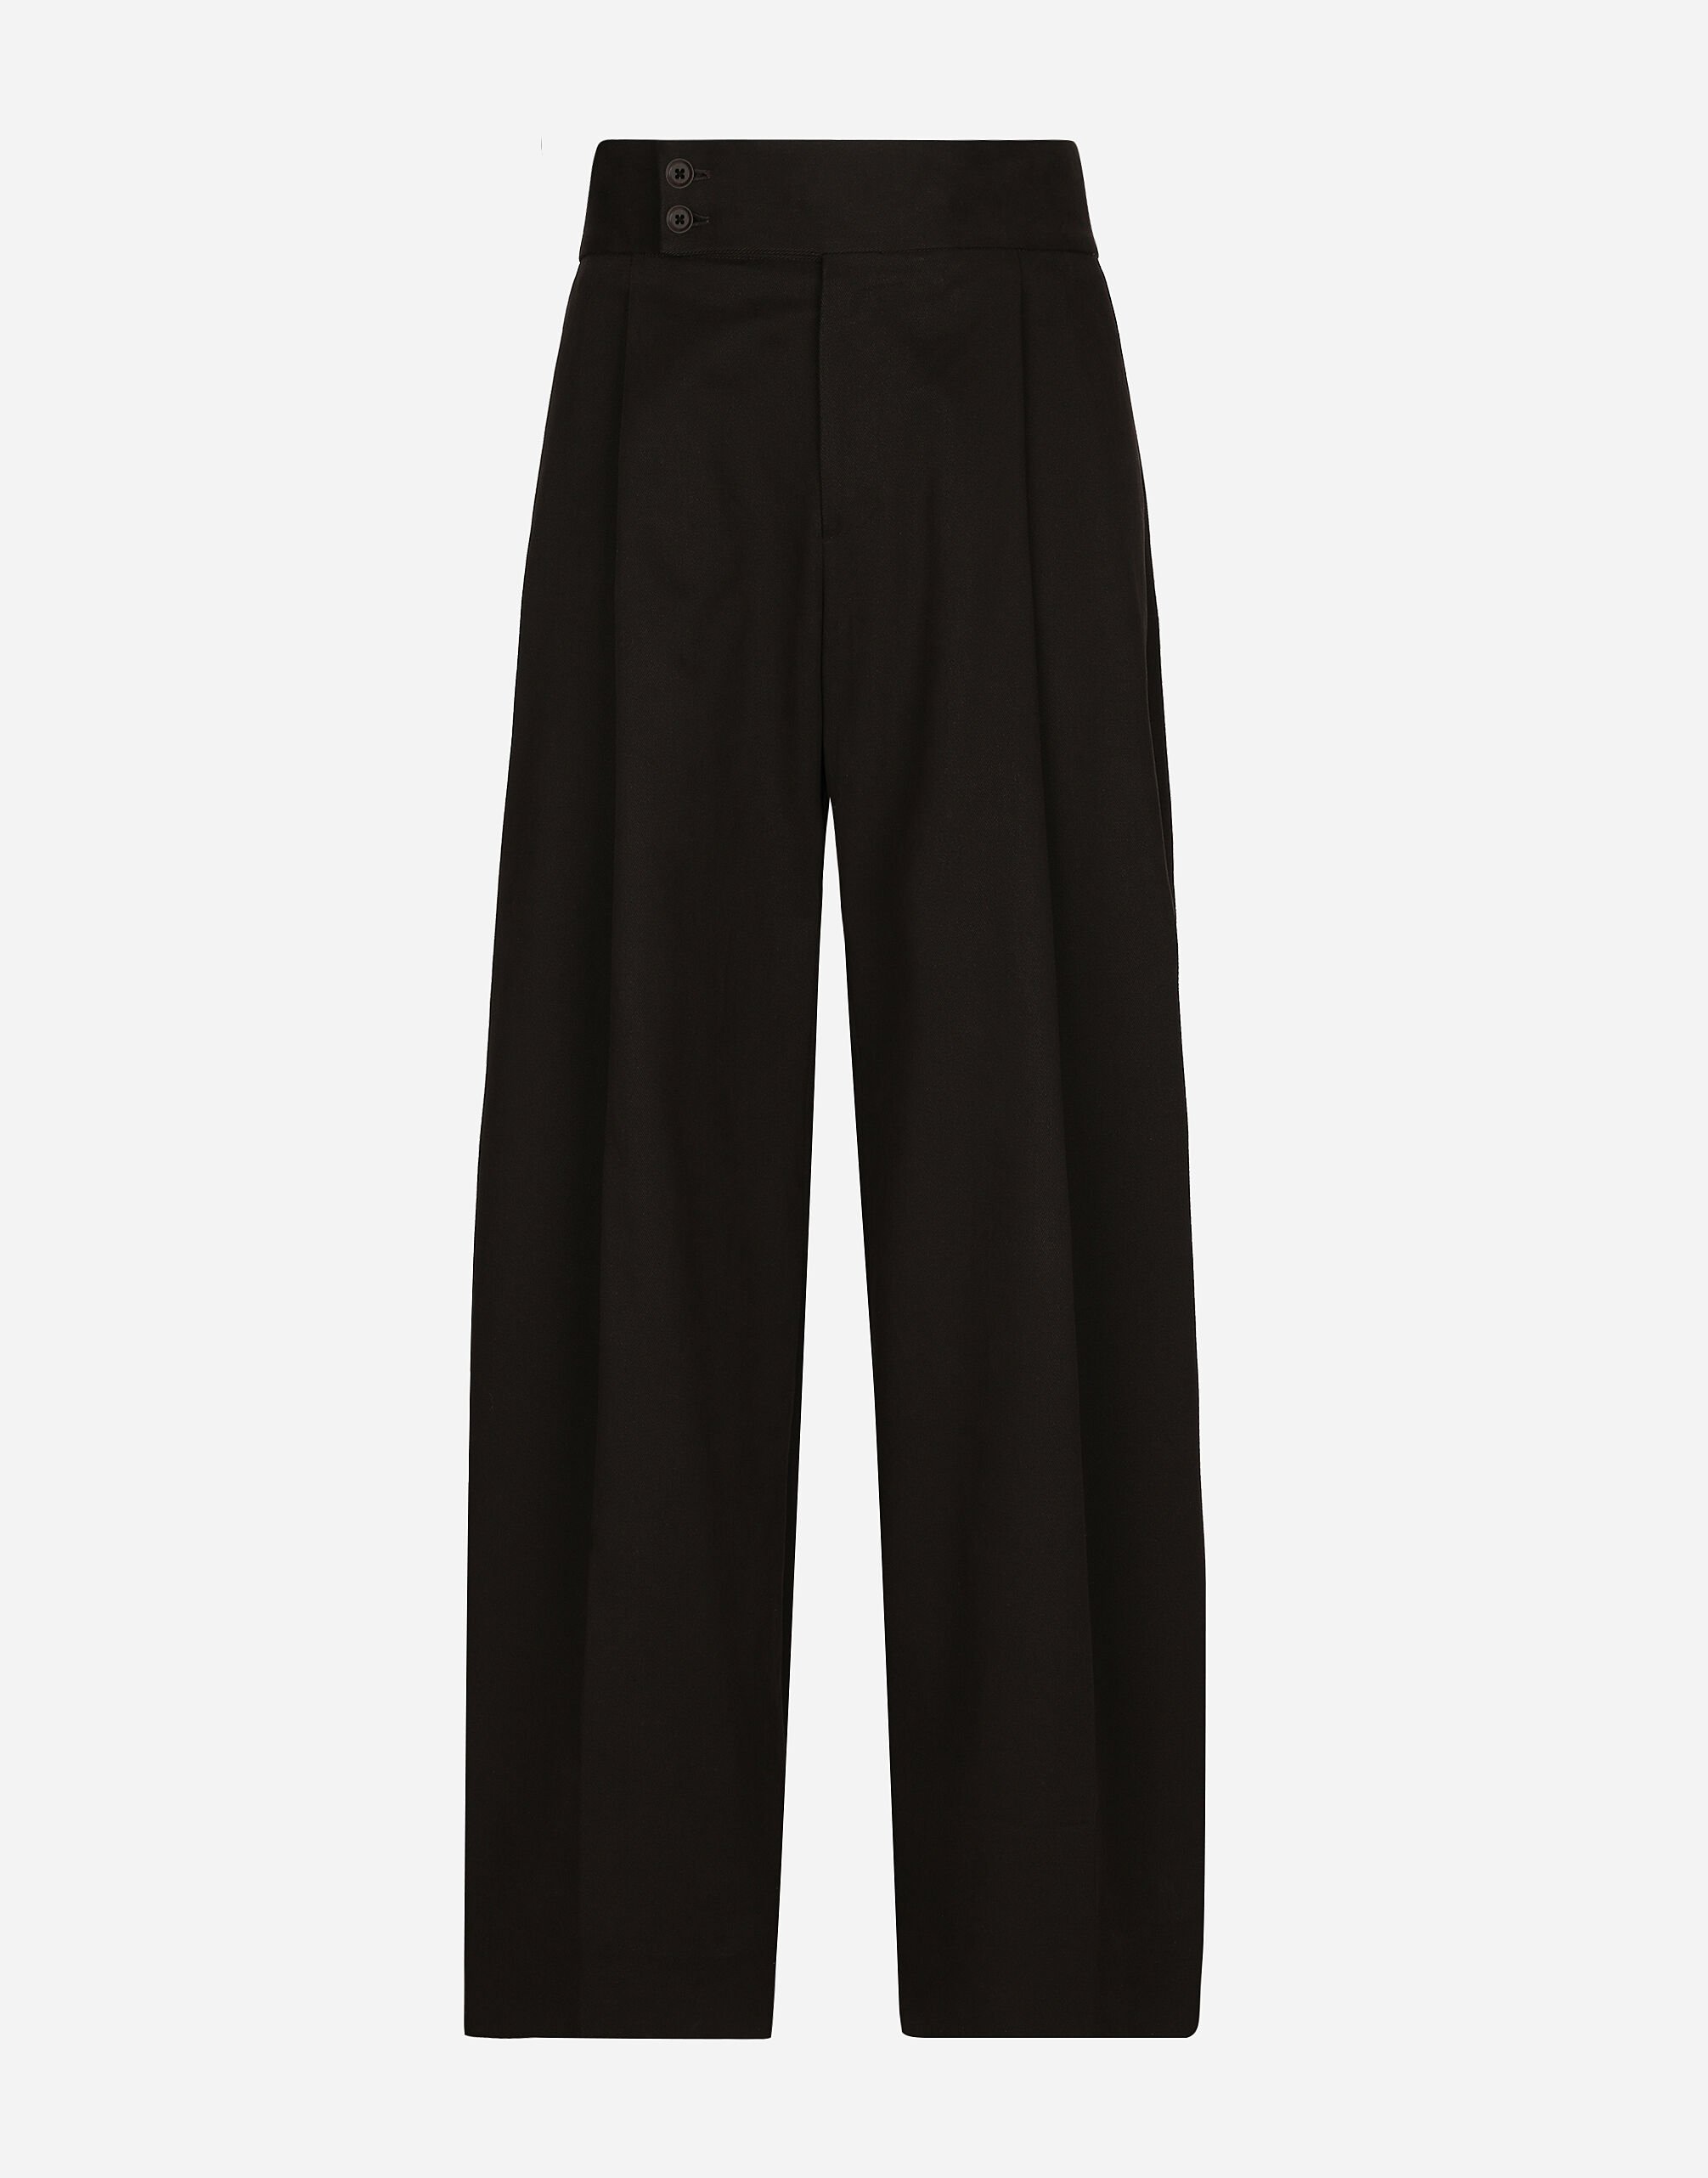 Dolce & Gabbana Tailored cotton pants with darts Brown GV1FXTHUMG4